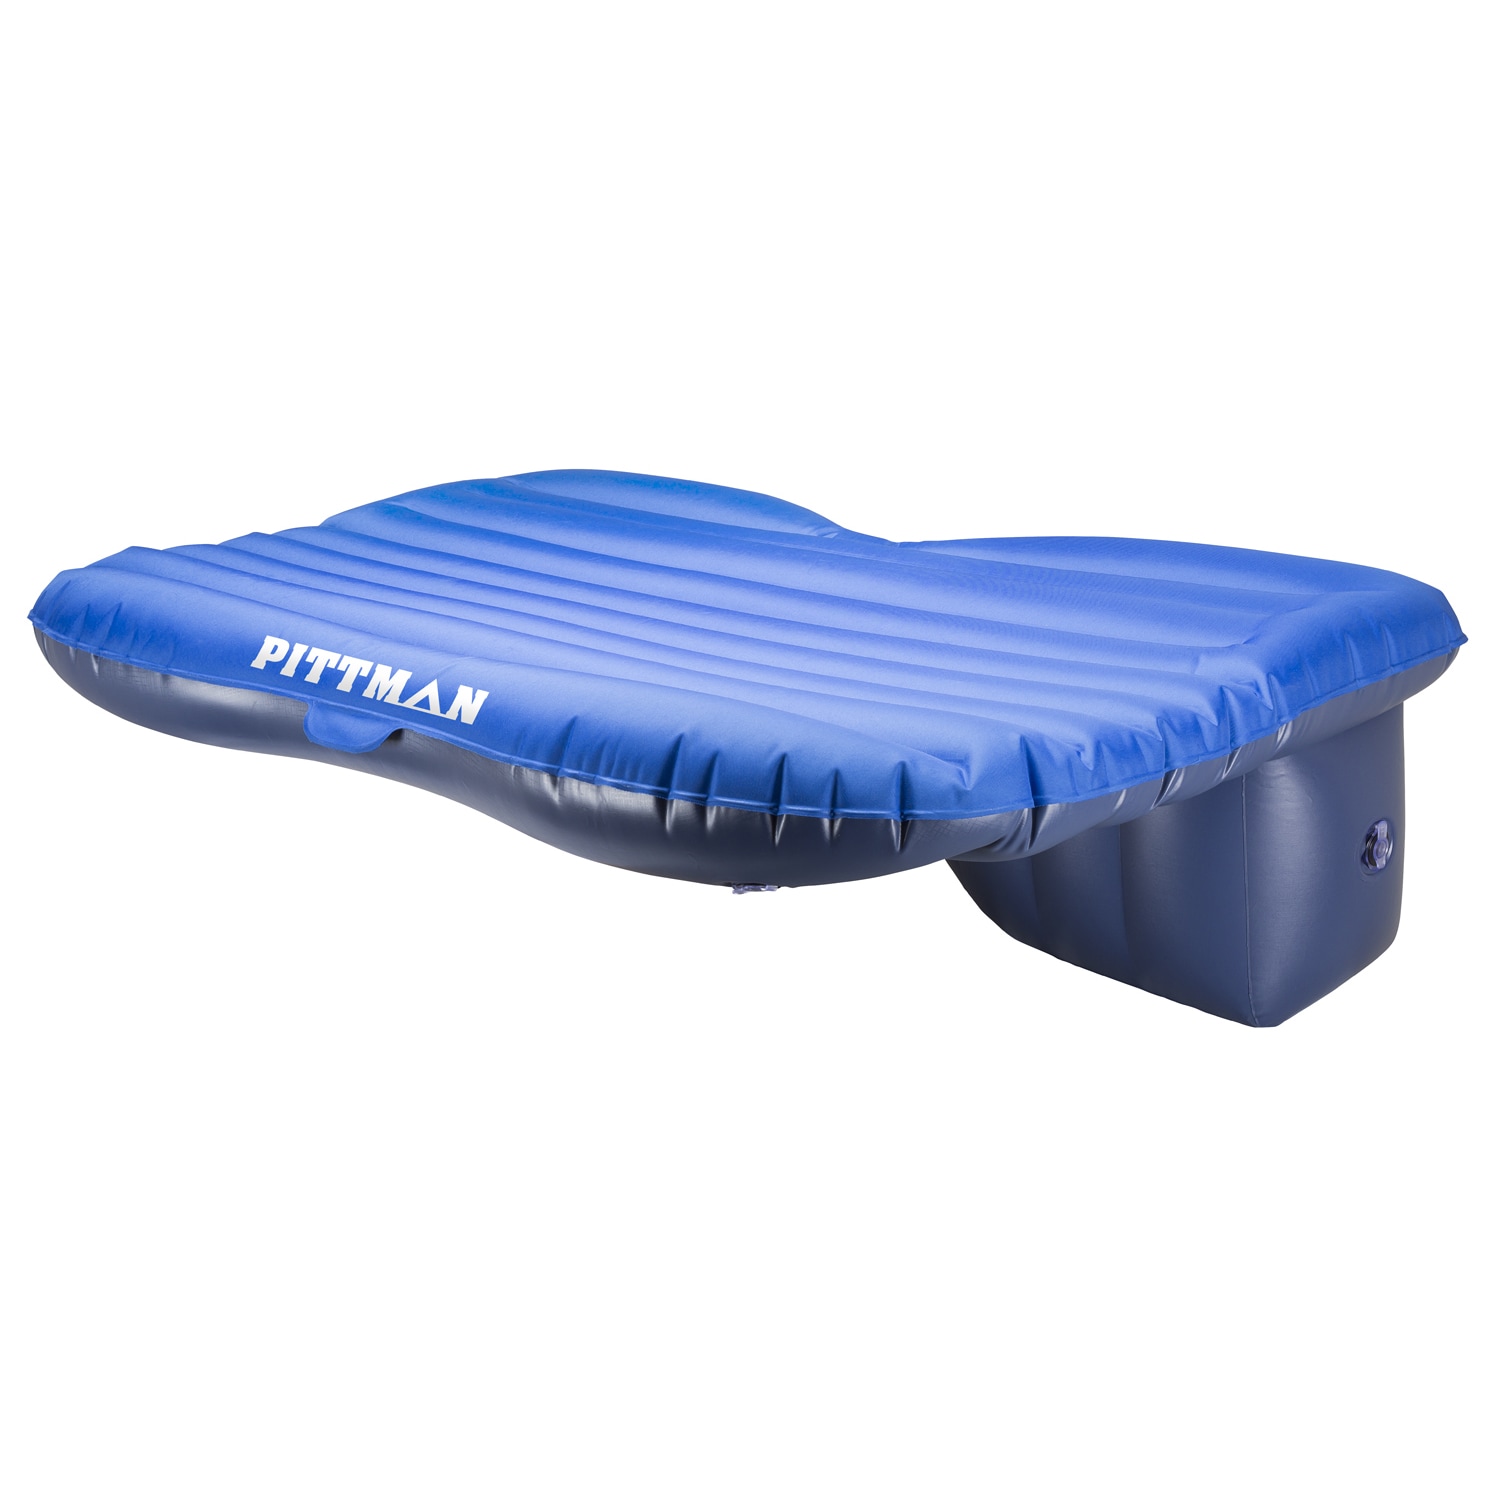 Pittman Inflatable Rear Seat Mattress for Mid-size Cars and SUV's - Blue